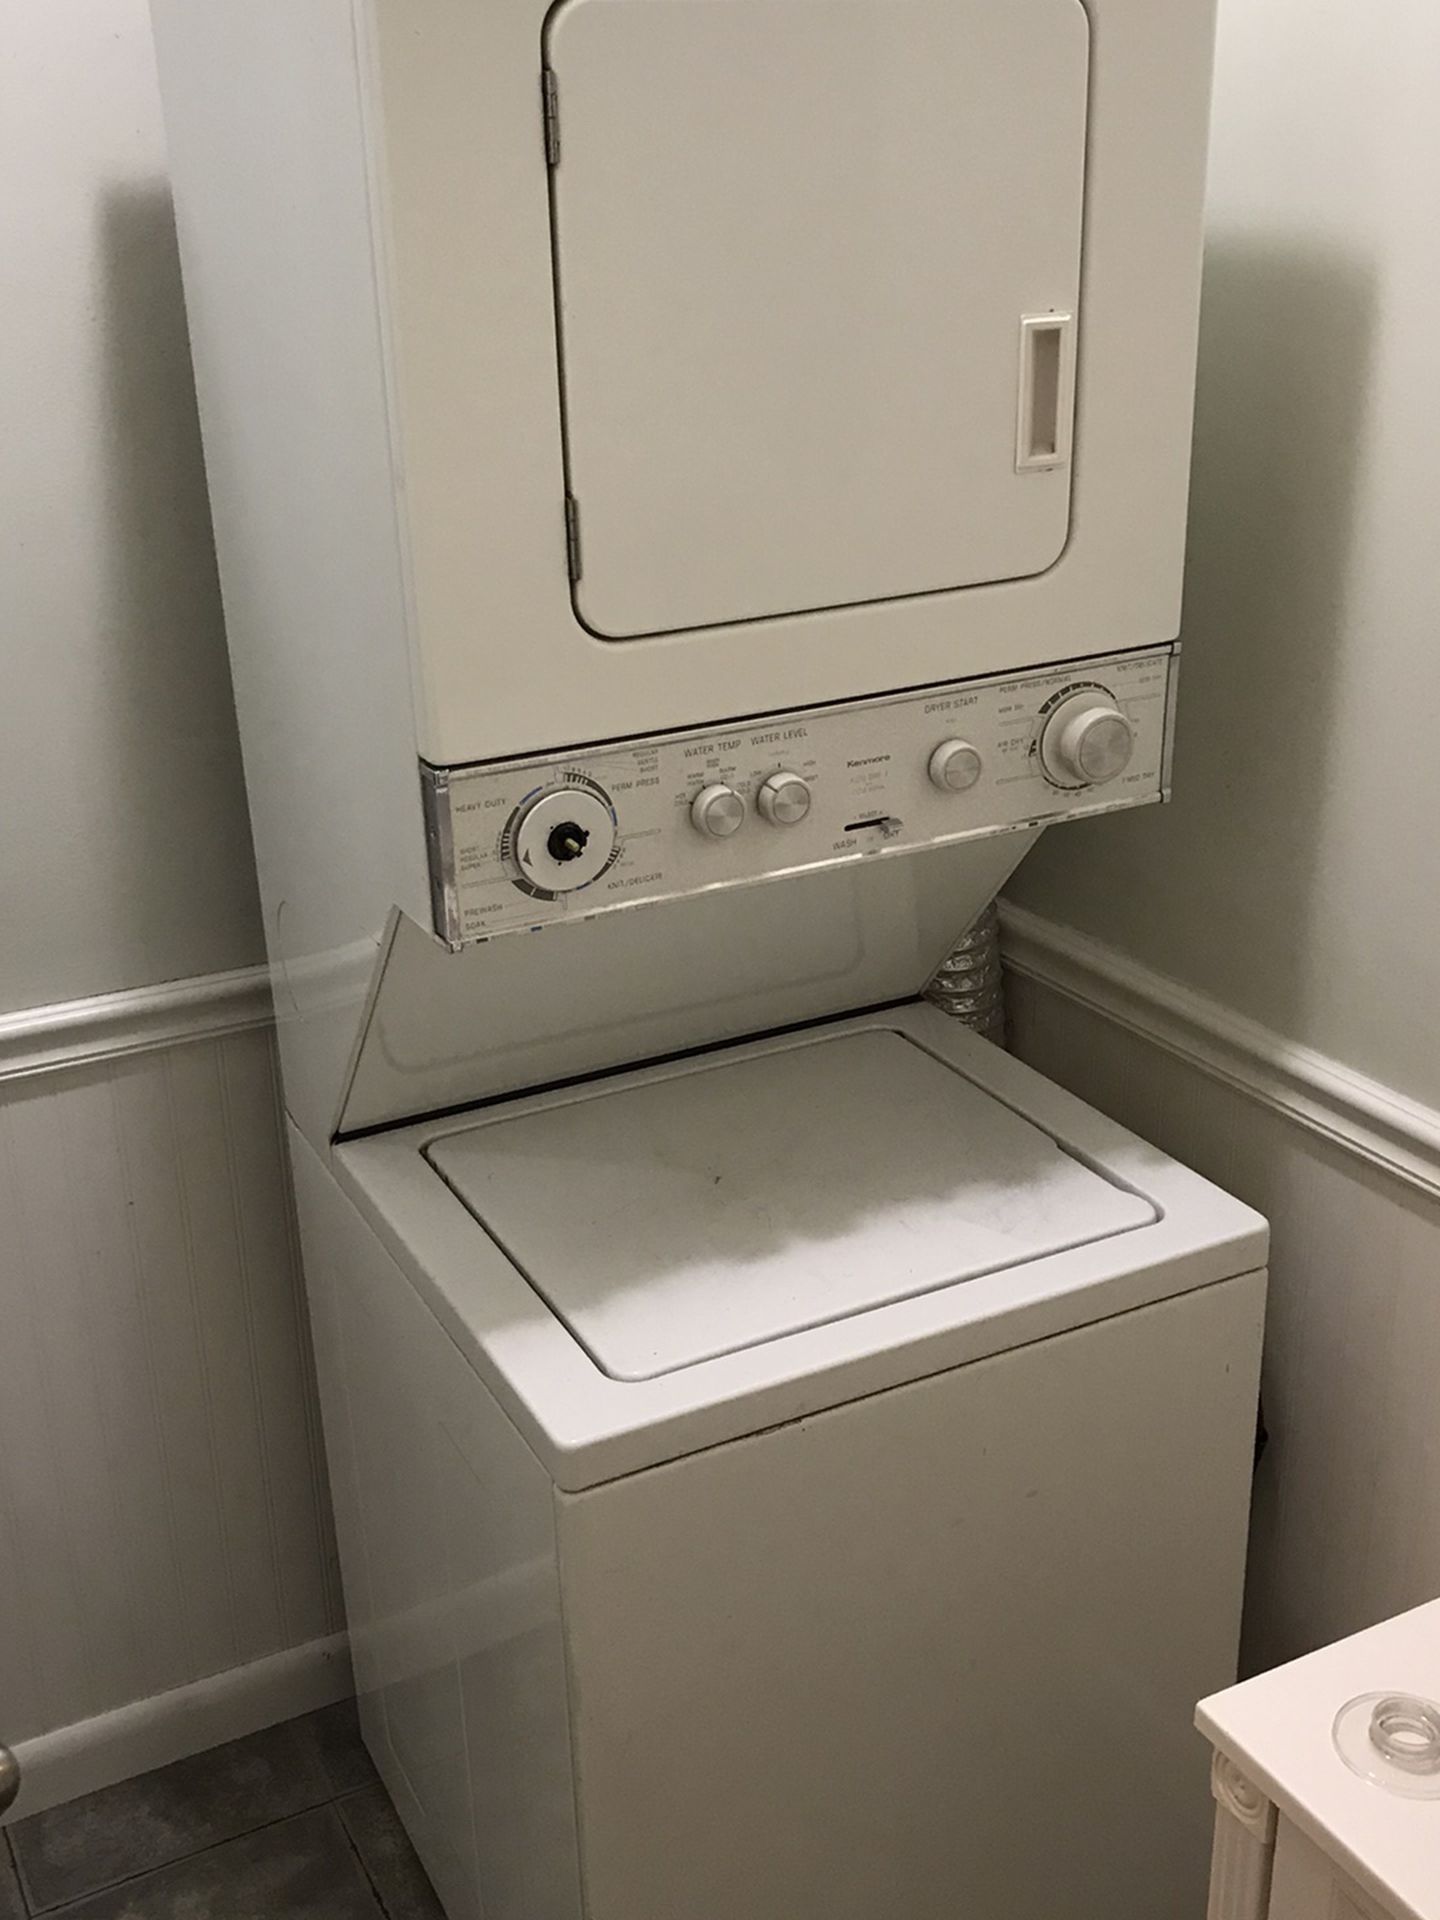 Kenmore Stackable Washer/Dryer